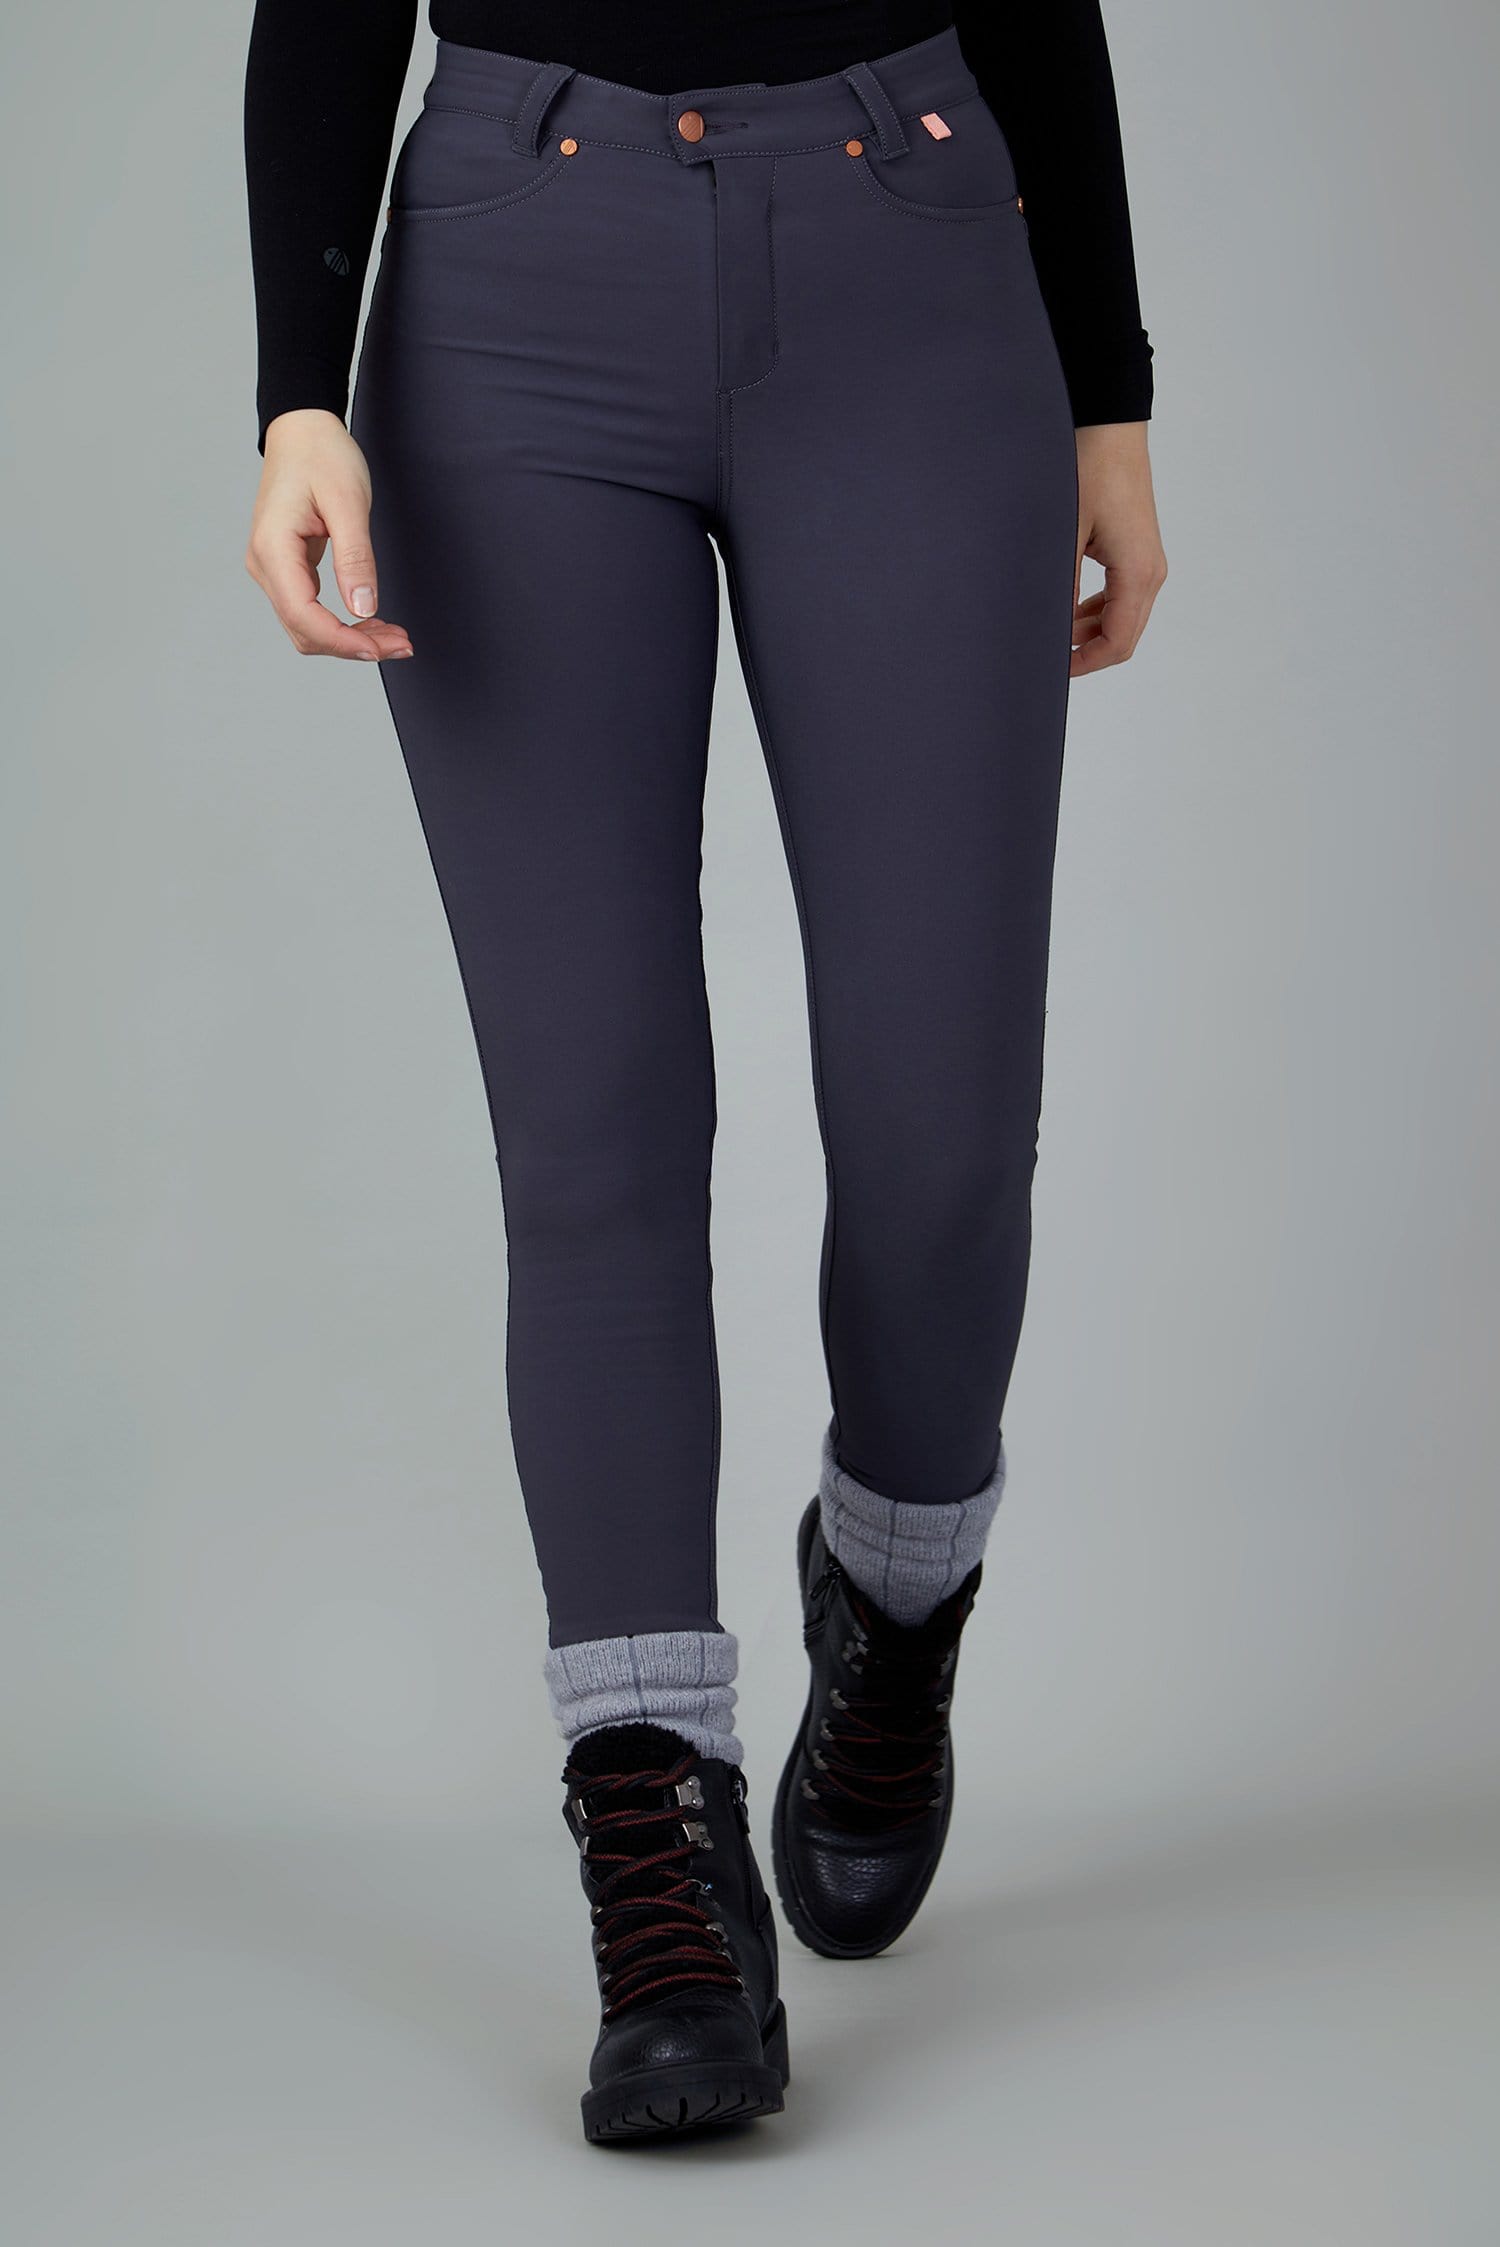 The Aventurite Stretch Skinny Outdoor Trousers - Obsidian - 38r / Uk20 - Womens - Acai Outdoorwear